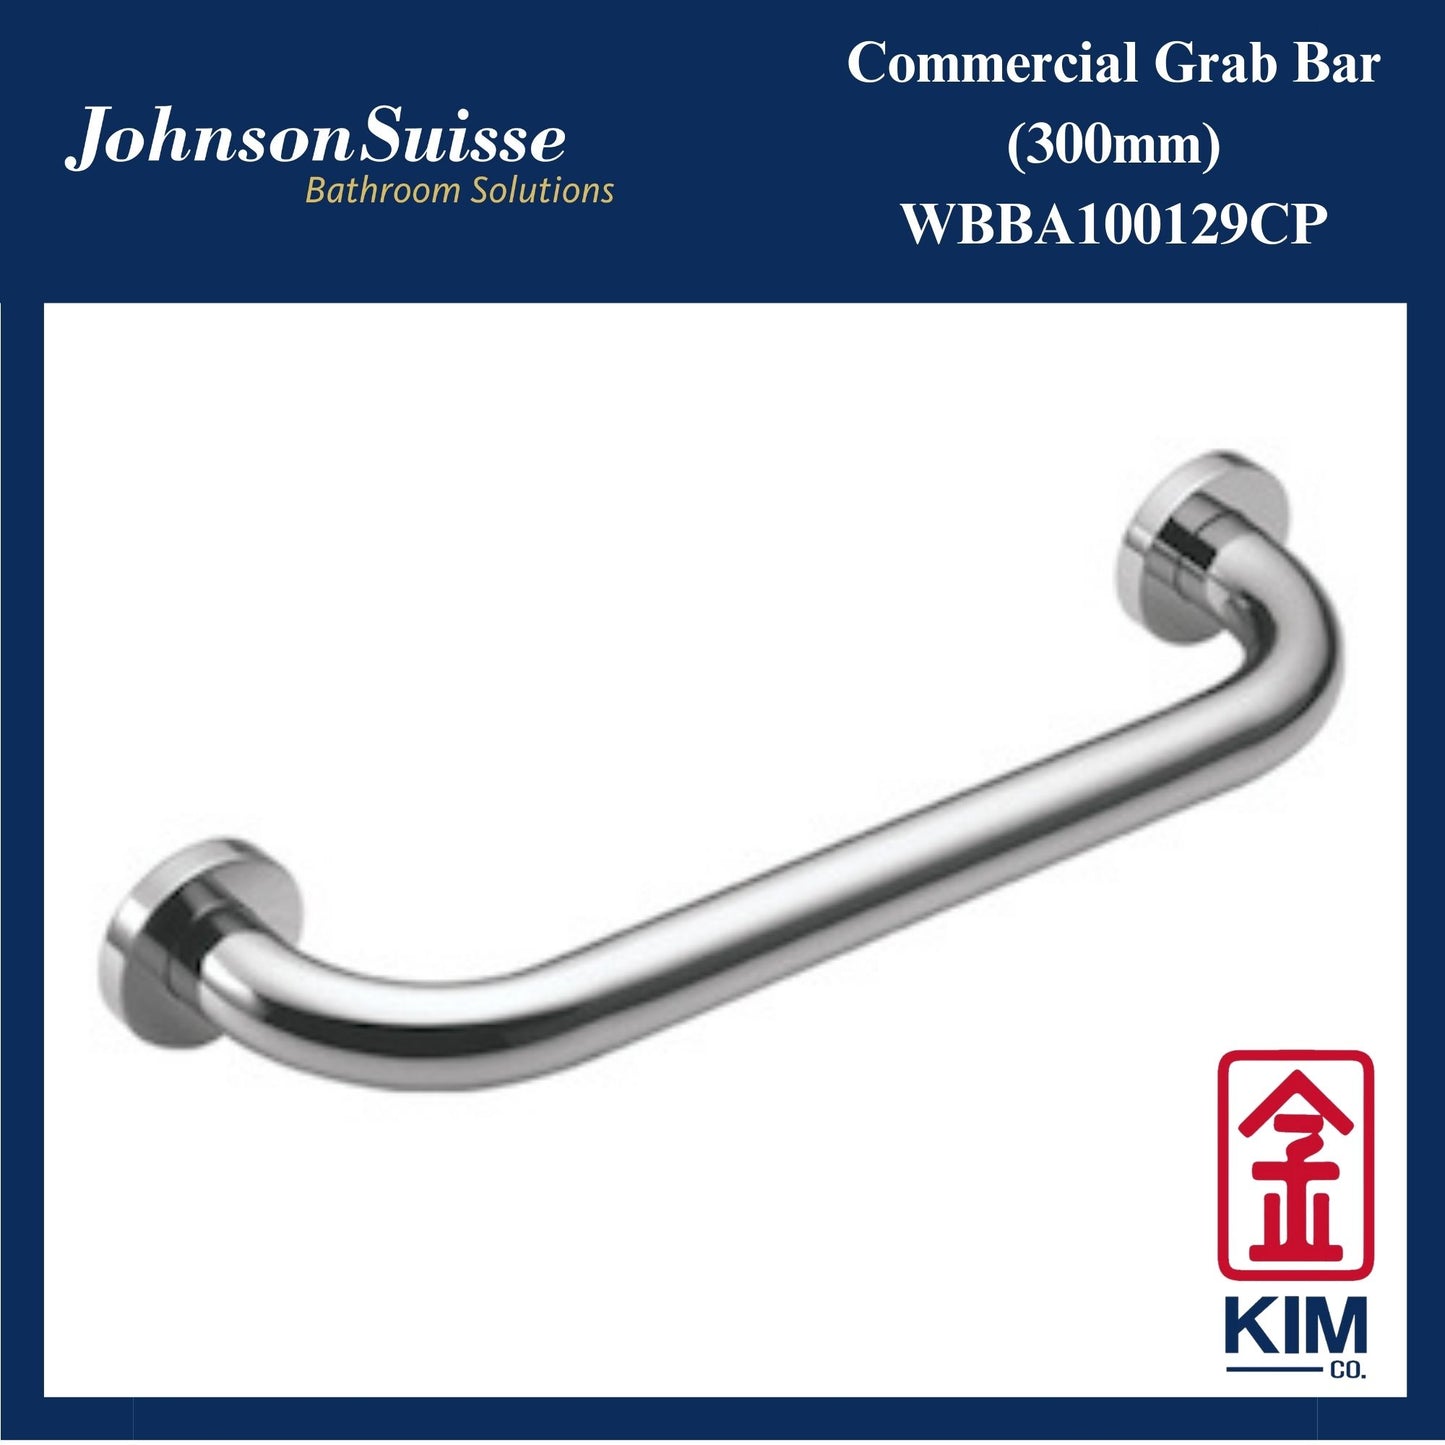 Johnson Suisse Commercial Safety Grab Bar 300mm (WBBA100129CP)